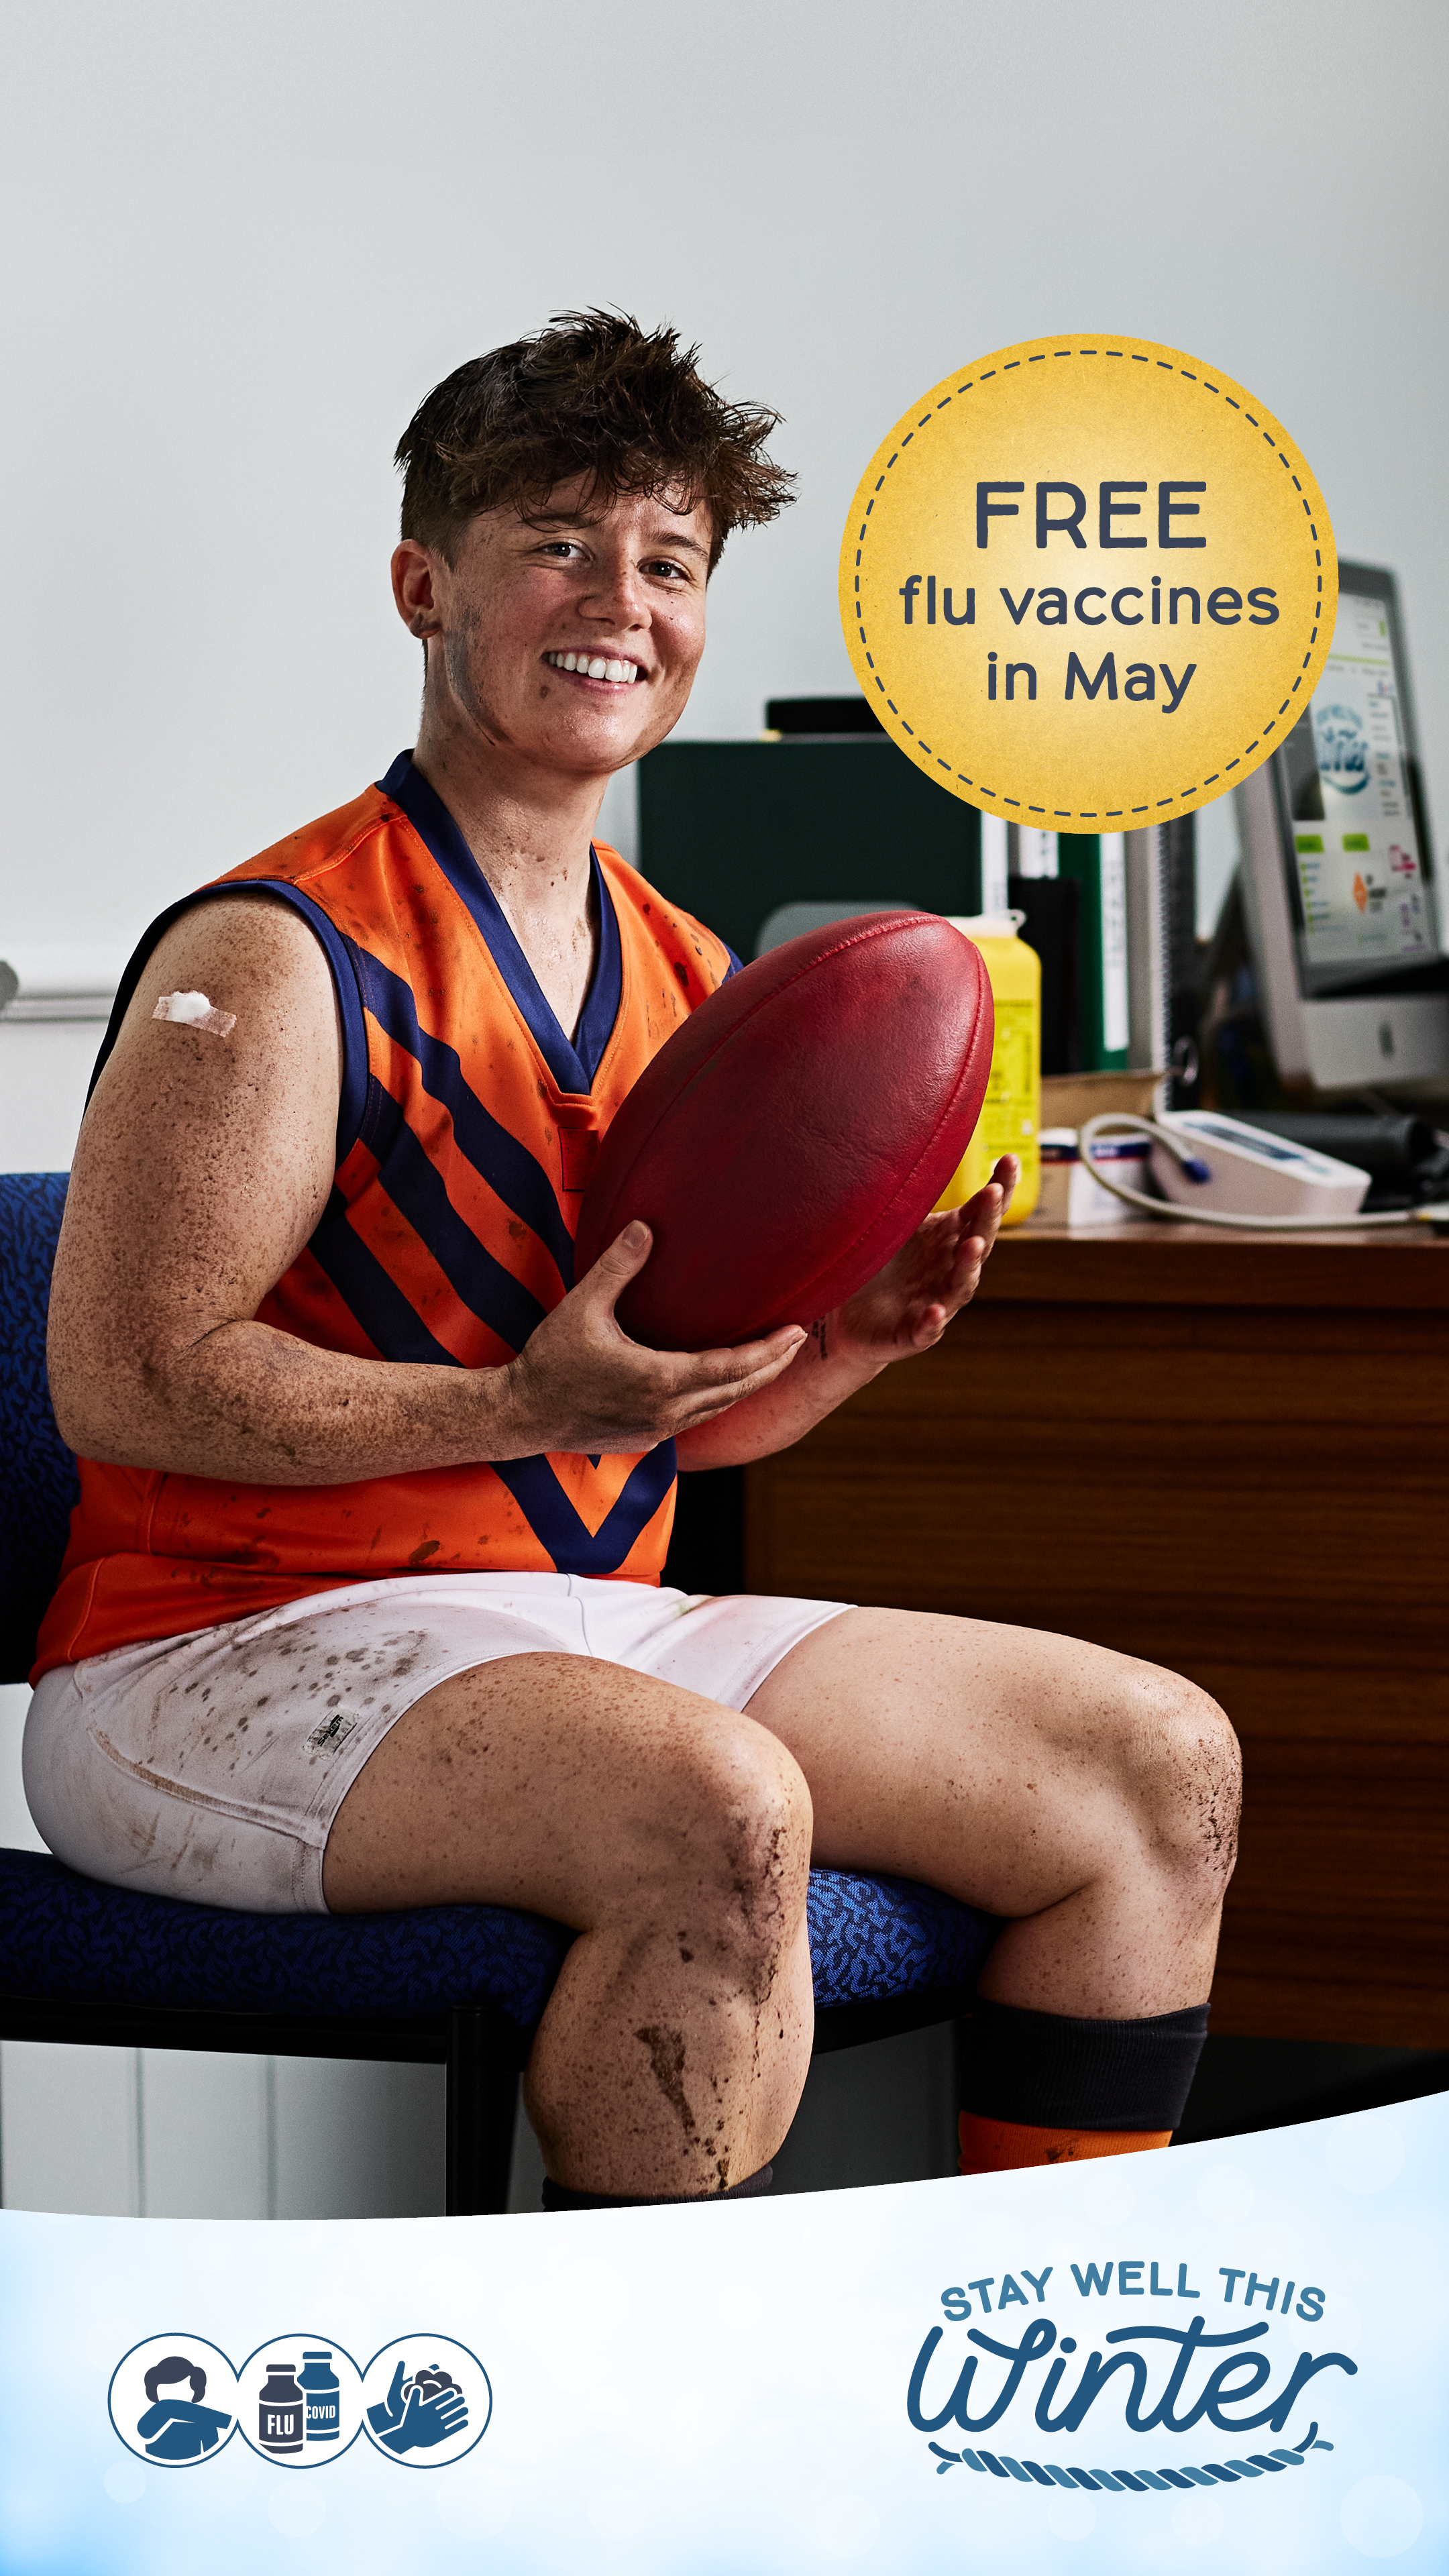 Free flu vaccine social media tile: featuring footballer getting vaccinated